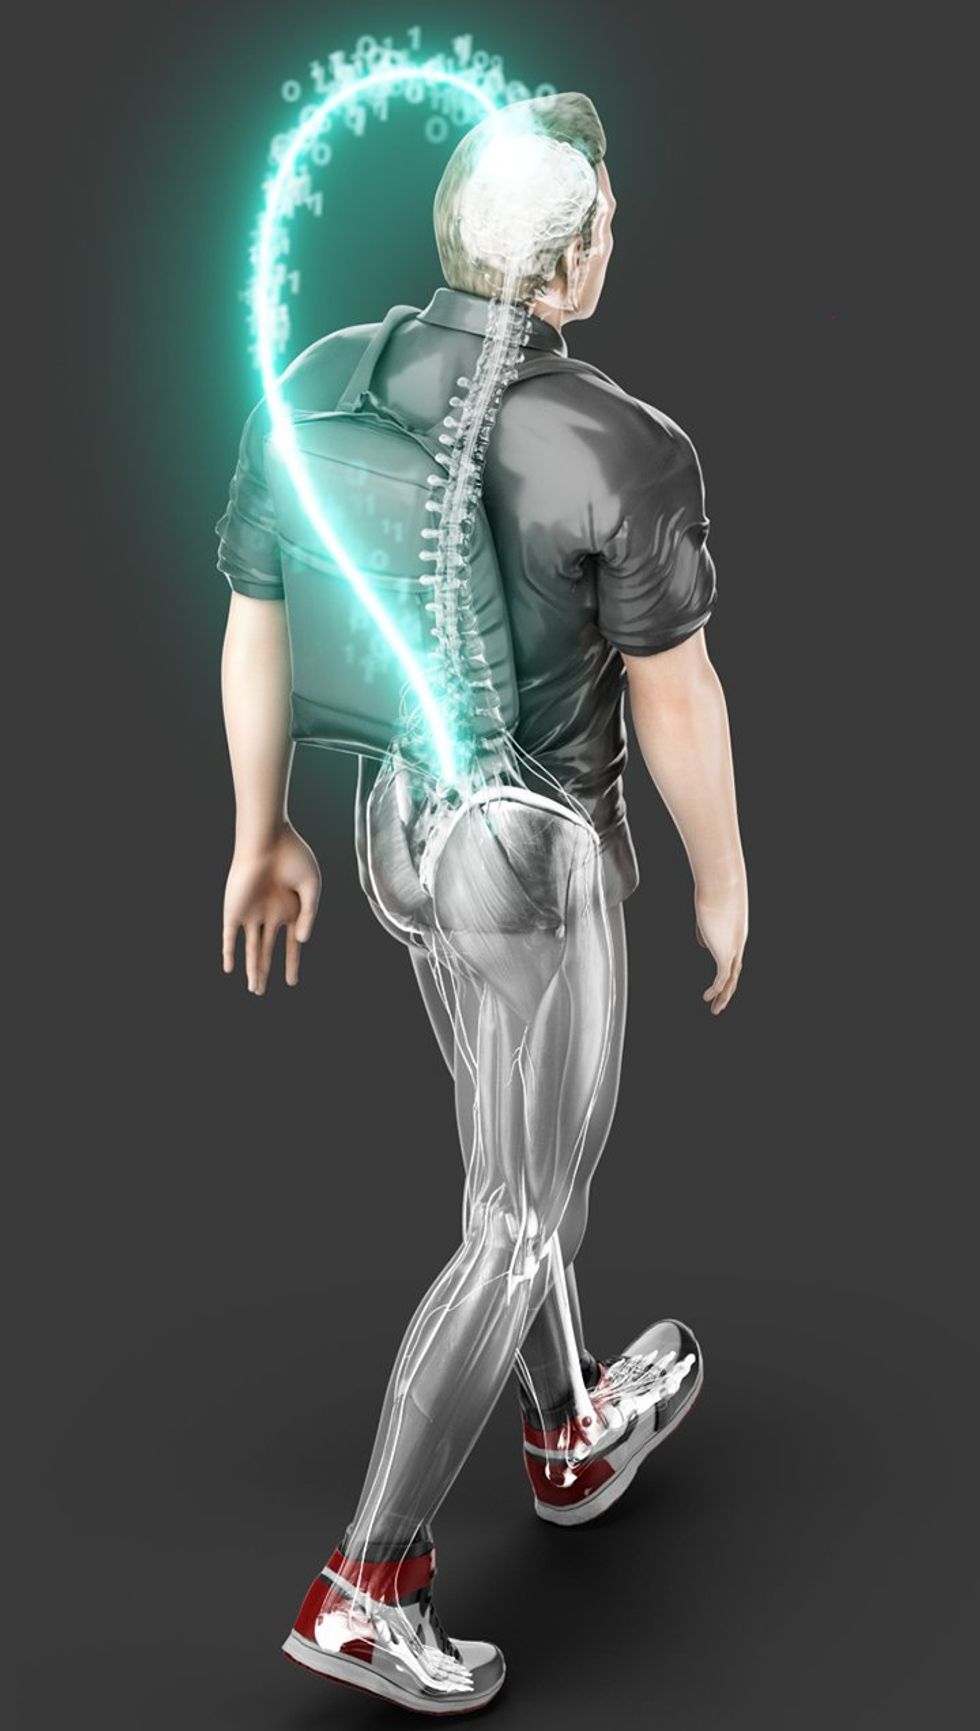 A conceptual illustration shows a male body walking. A green light with binary code connects his spine to his brain as he takes a step forward.